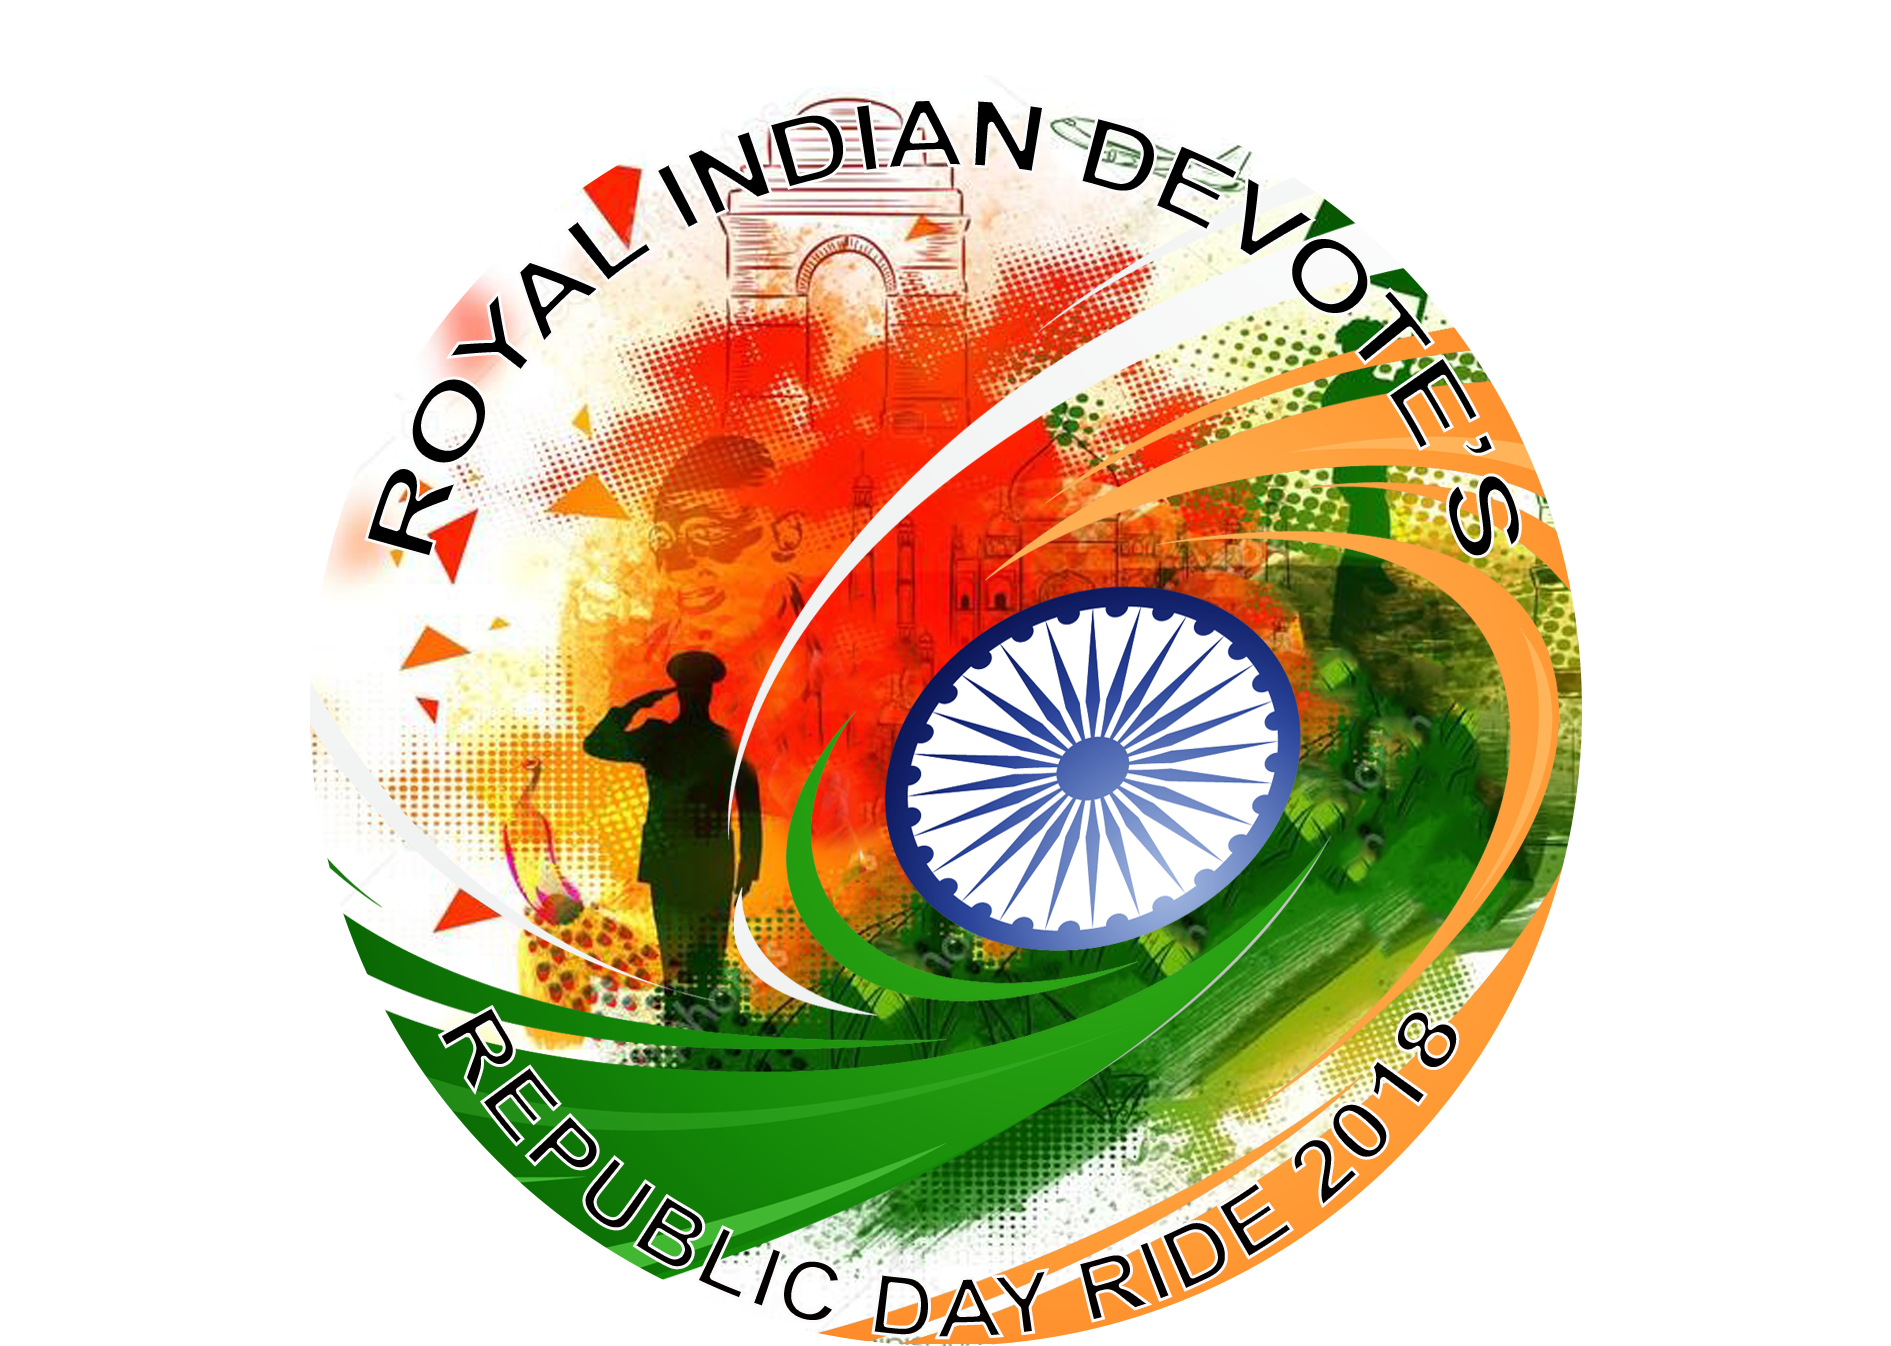 Republic Day Ride2018 Graphic PNG